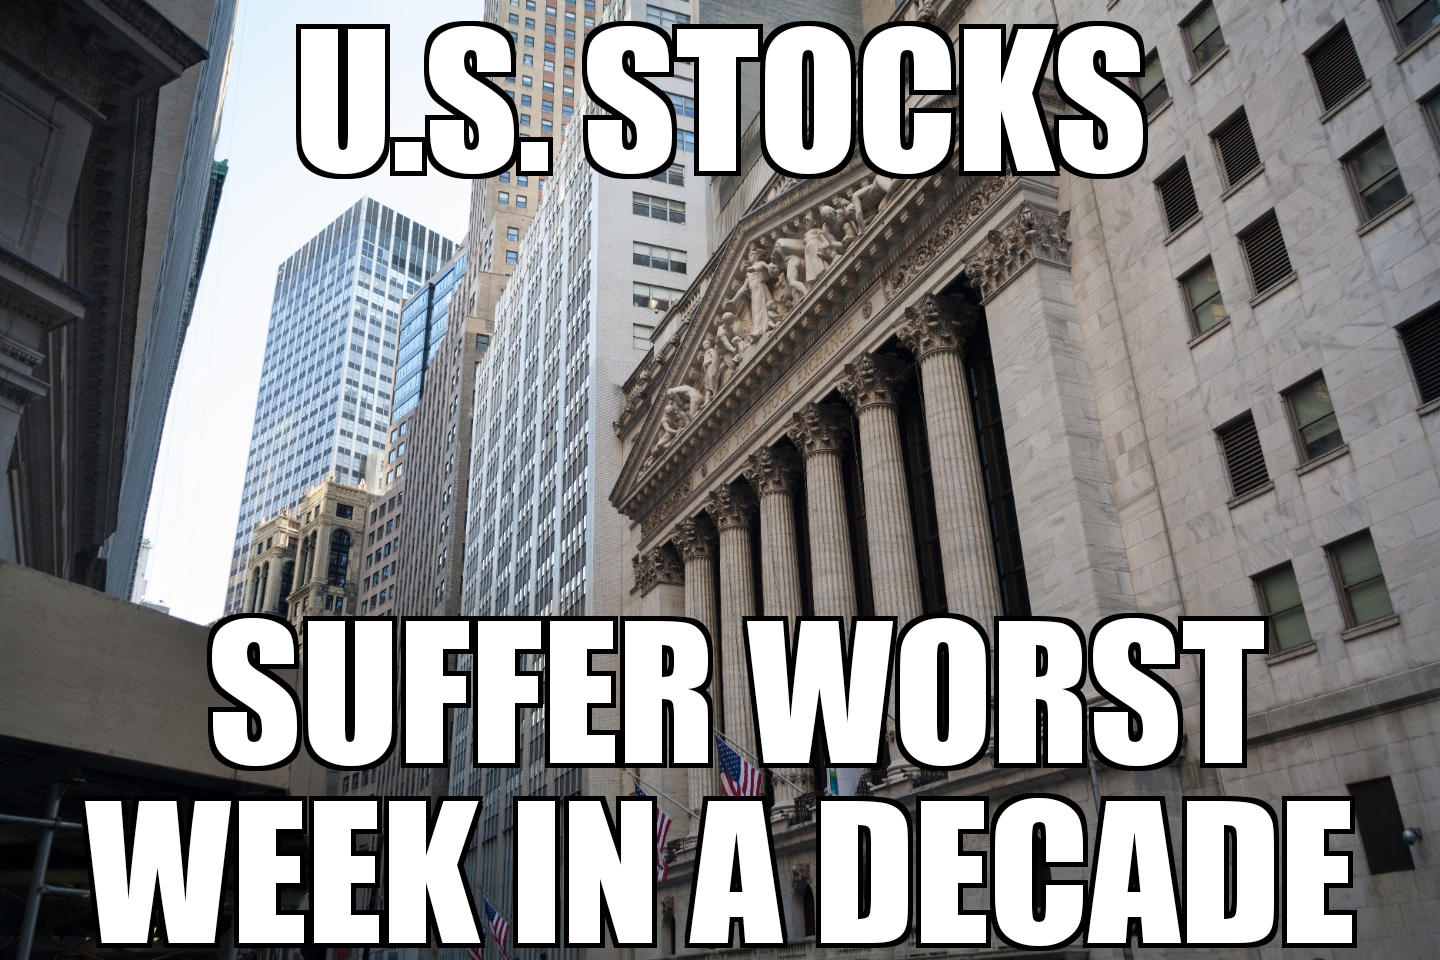 Stocks worst week in a decade